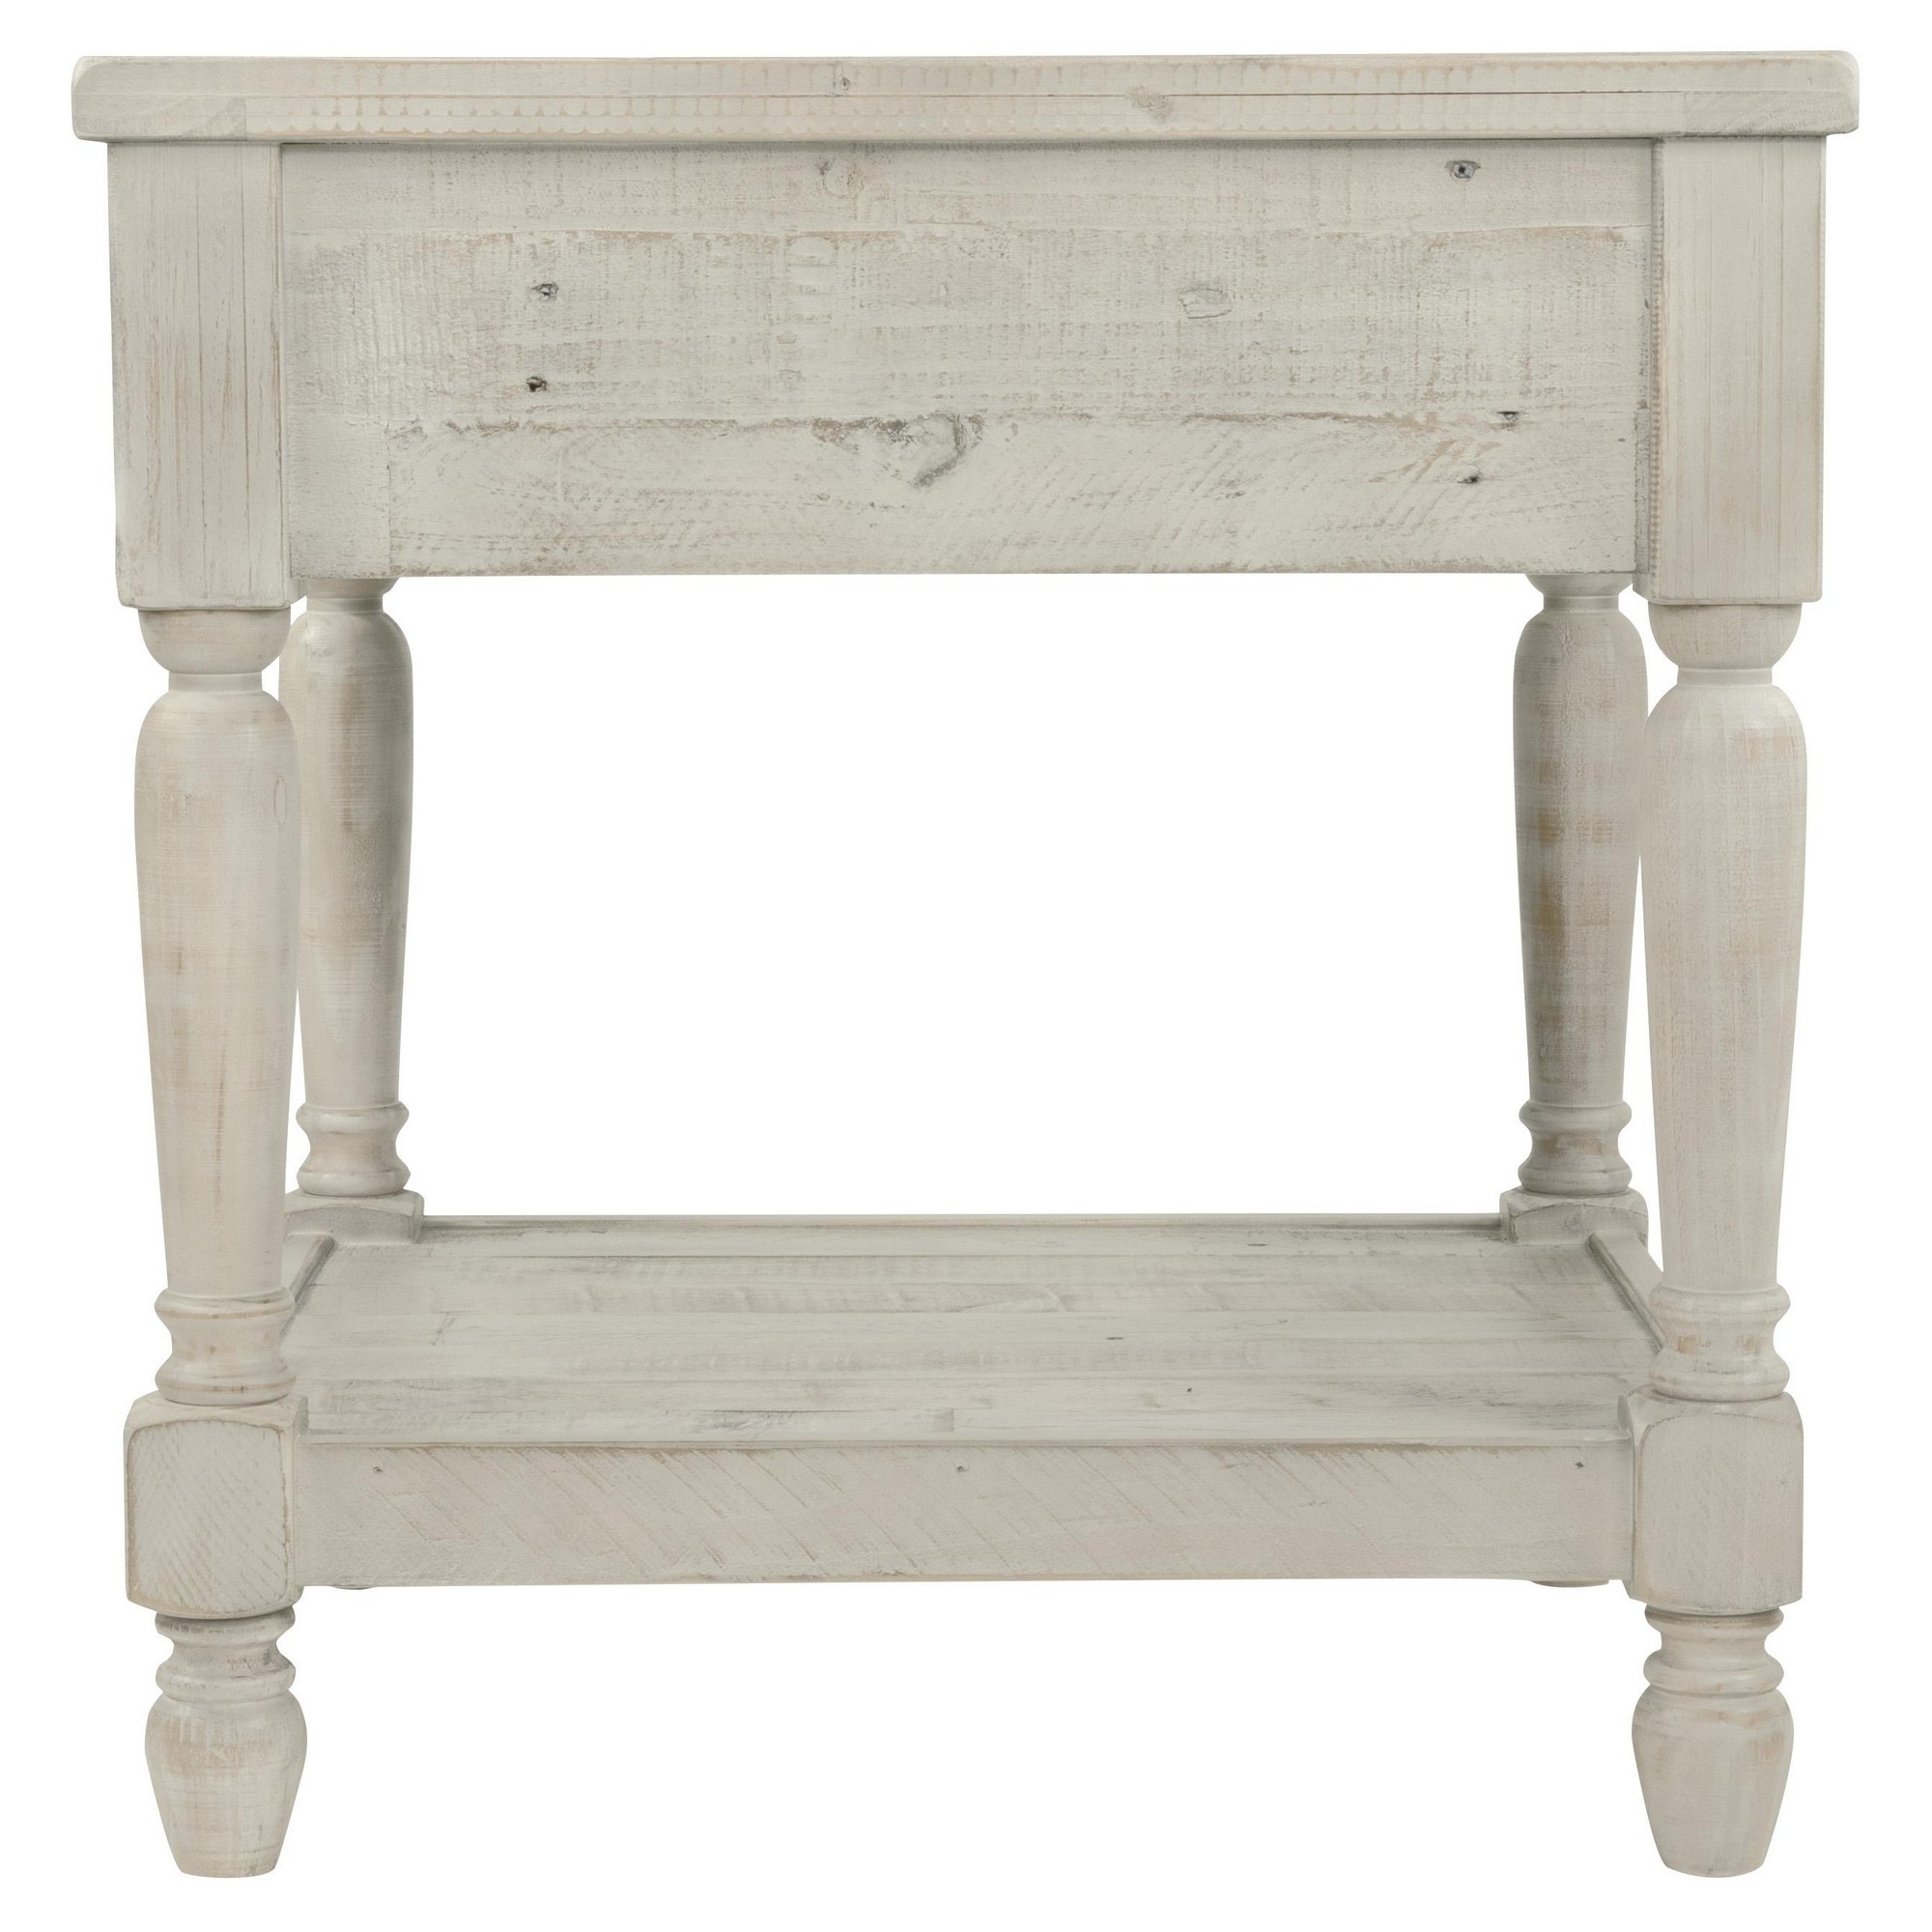 Plank Style End Table With 1 Drawer And Open Bottom Shelf, Washed White- Saltoro Sherpi